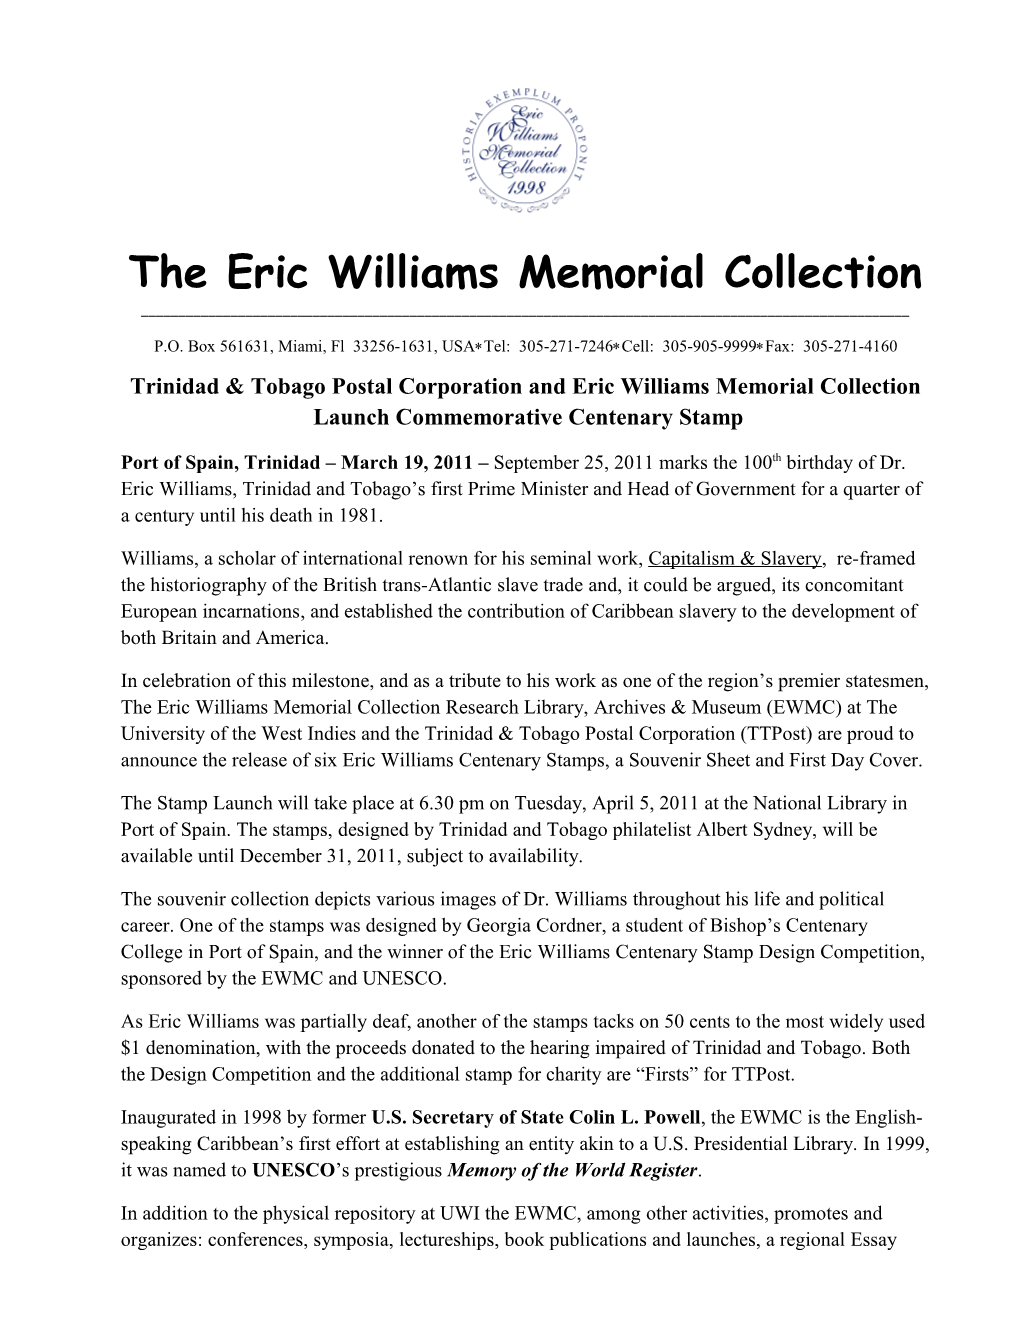 The Trinidad & Tobago Postal Corporation and the Eric Williams Memorial Collection Launch